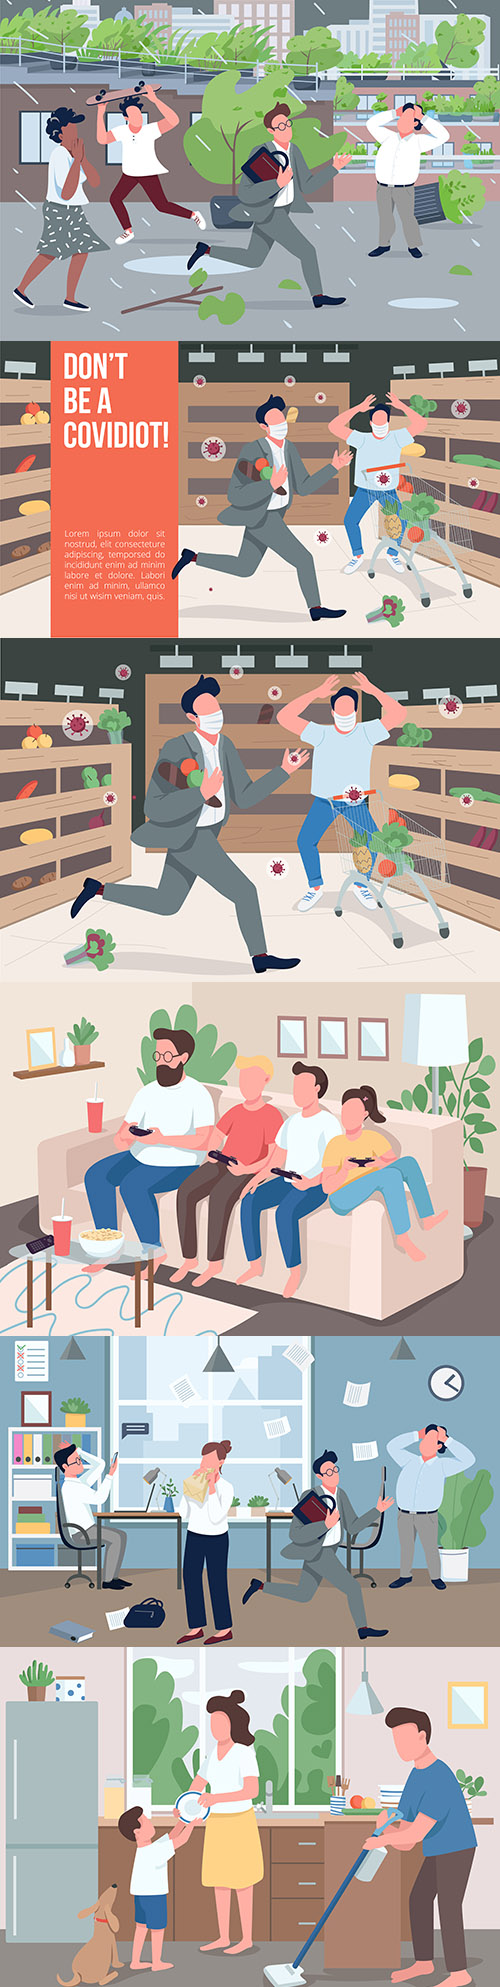 People in different situations at home and on walk illustration
